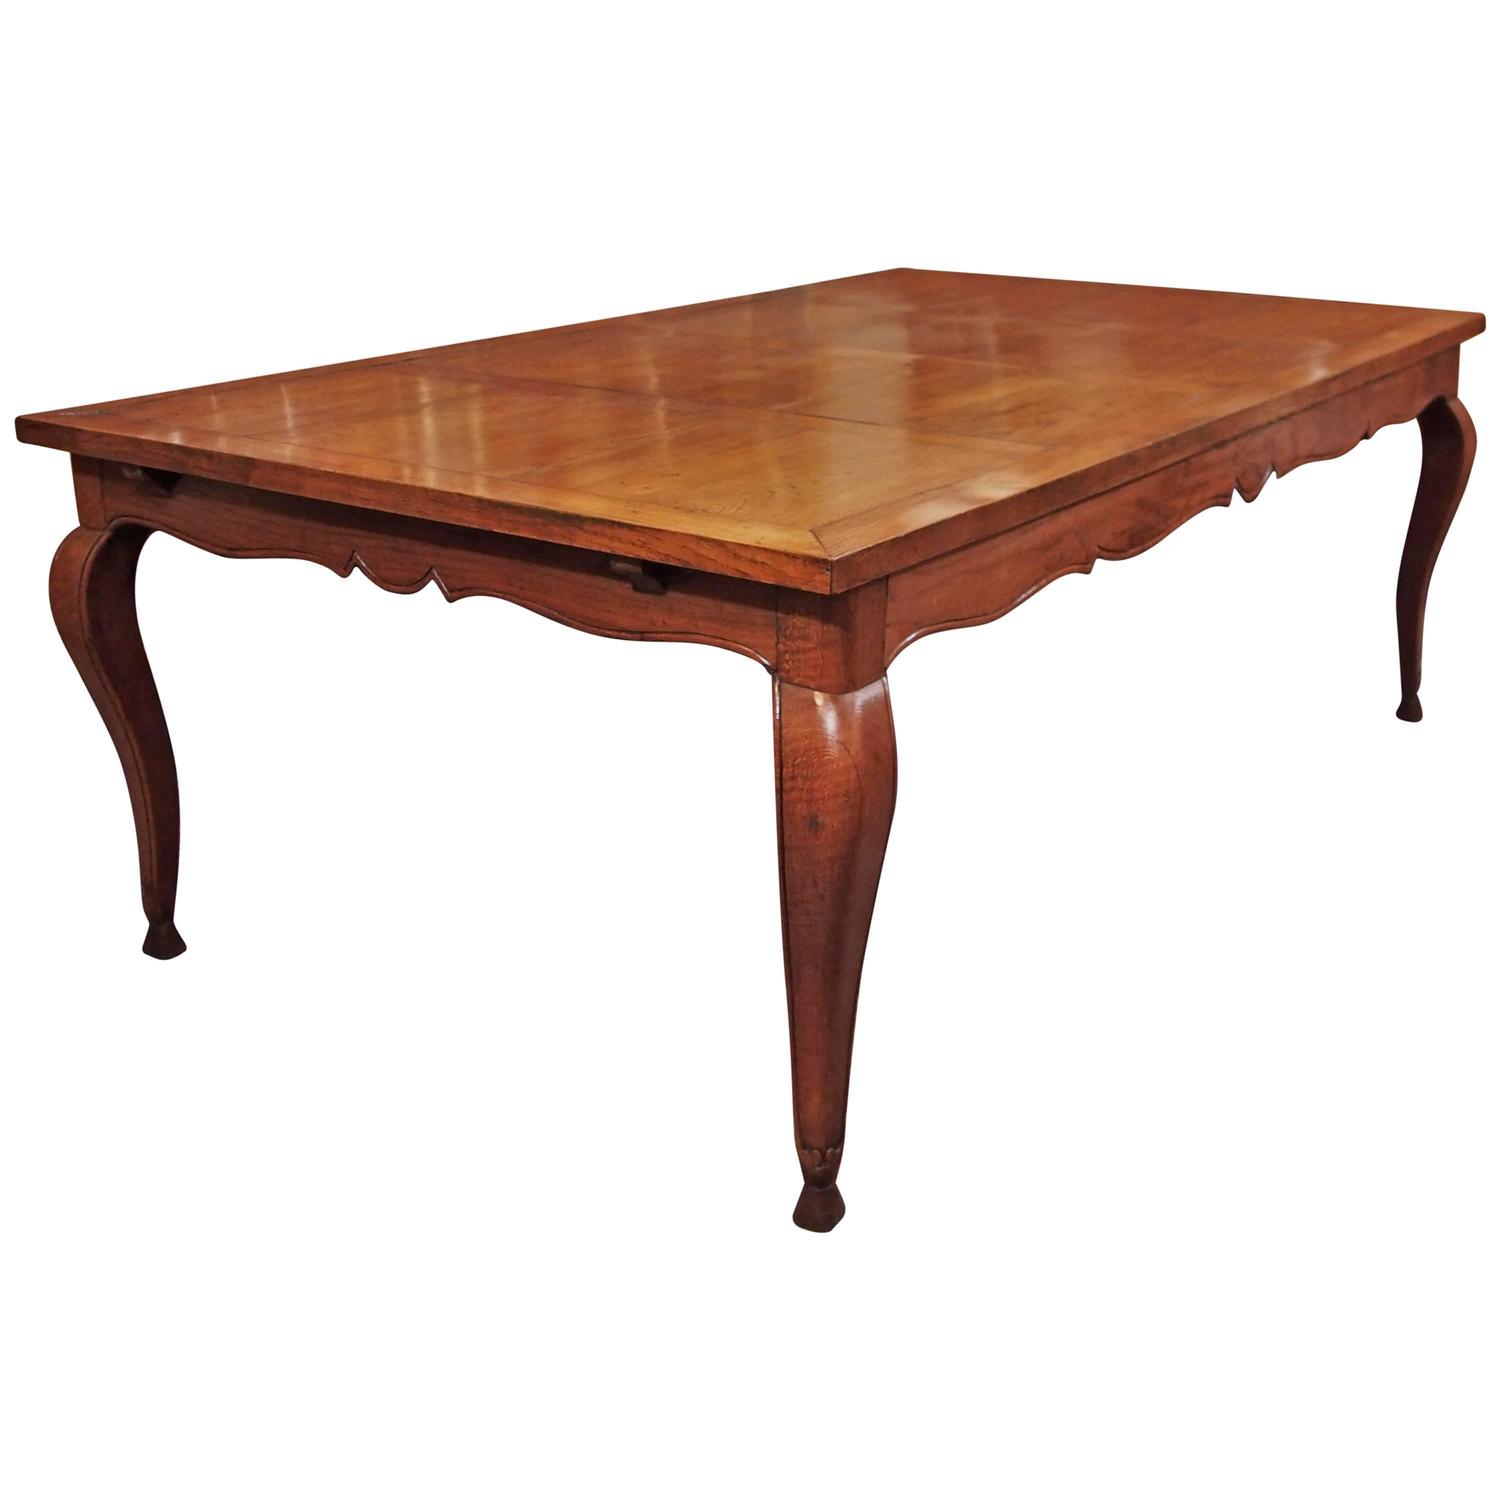 Antique French Provincial Dining Table, circa 1890 at 1stdibs